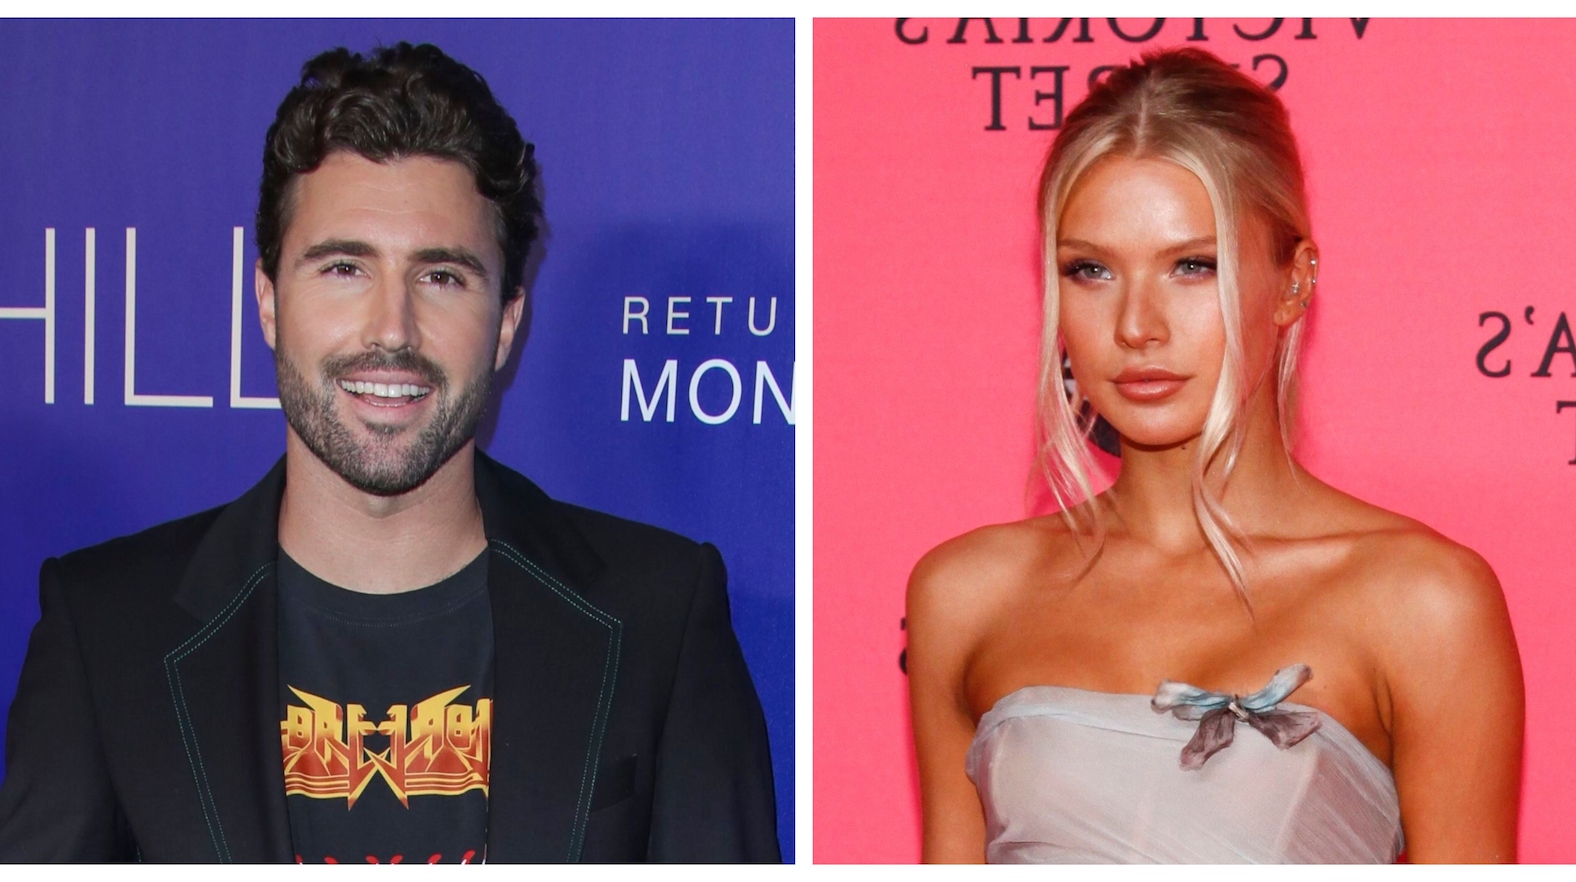 Brody Jenner and Josie Canseco Are Instagram Official After VMAs picture